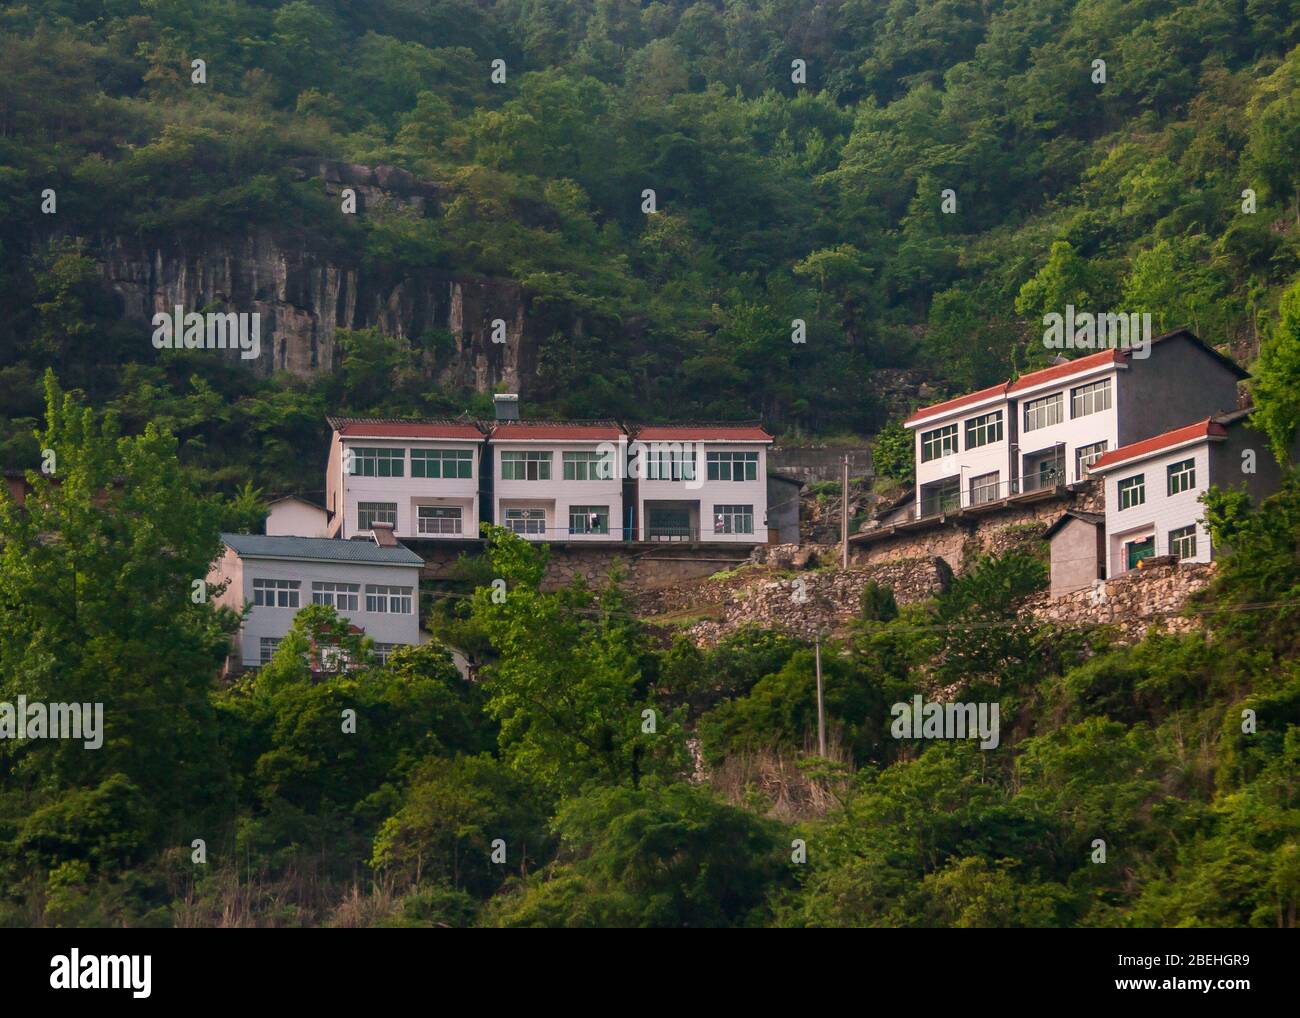 Yichang, China - May 5, 2010: New white houses with red roofs built above cliff on slope of Green foliage covered mountain. Stock Photo